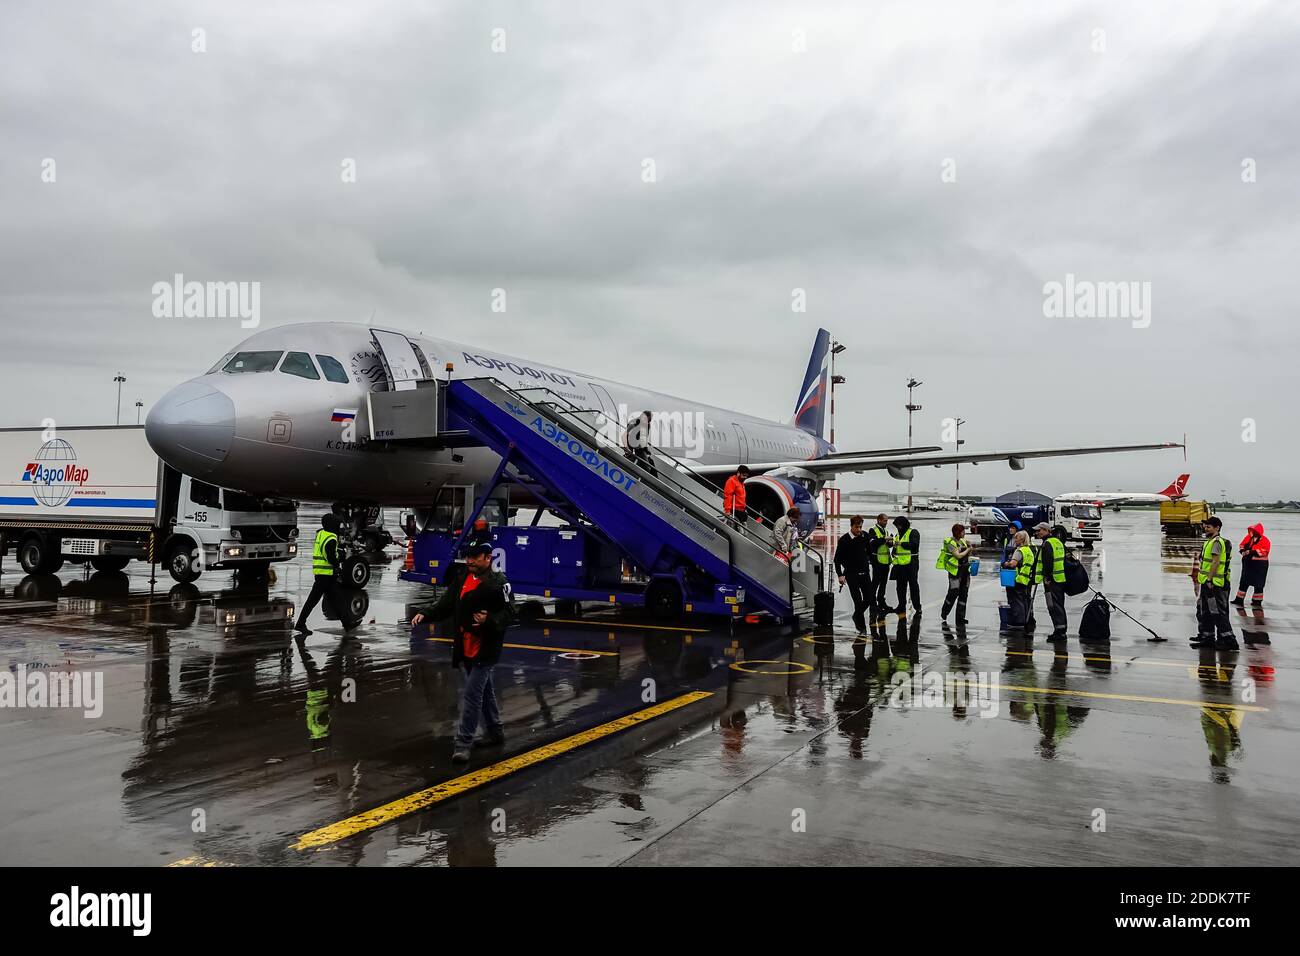 Aeroflot Russian Airlines Airbus A320 airplane Stock Photo